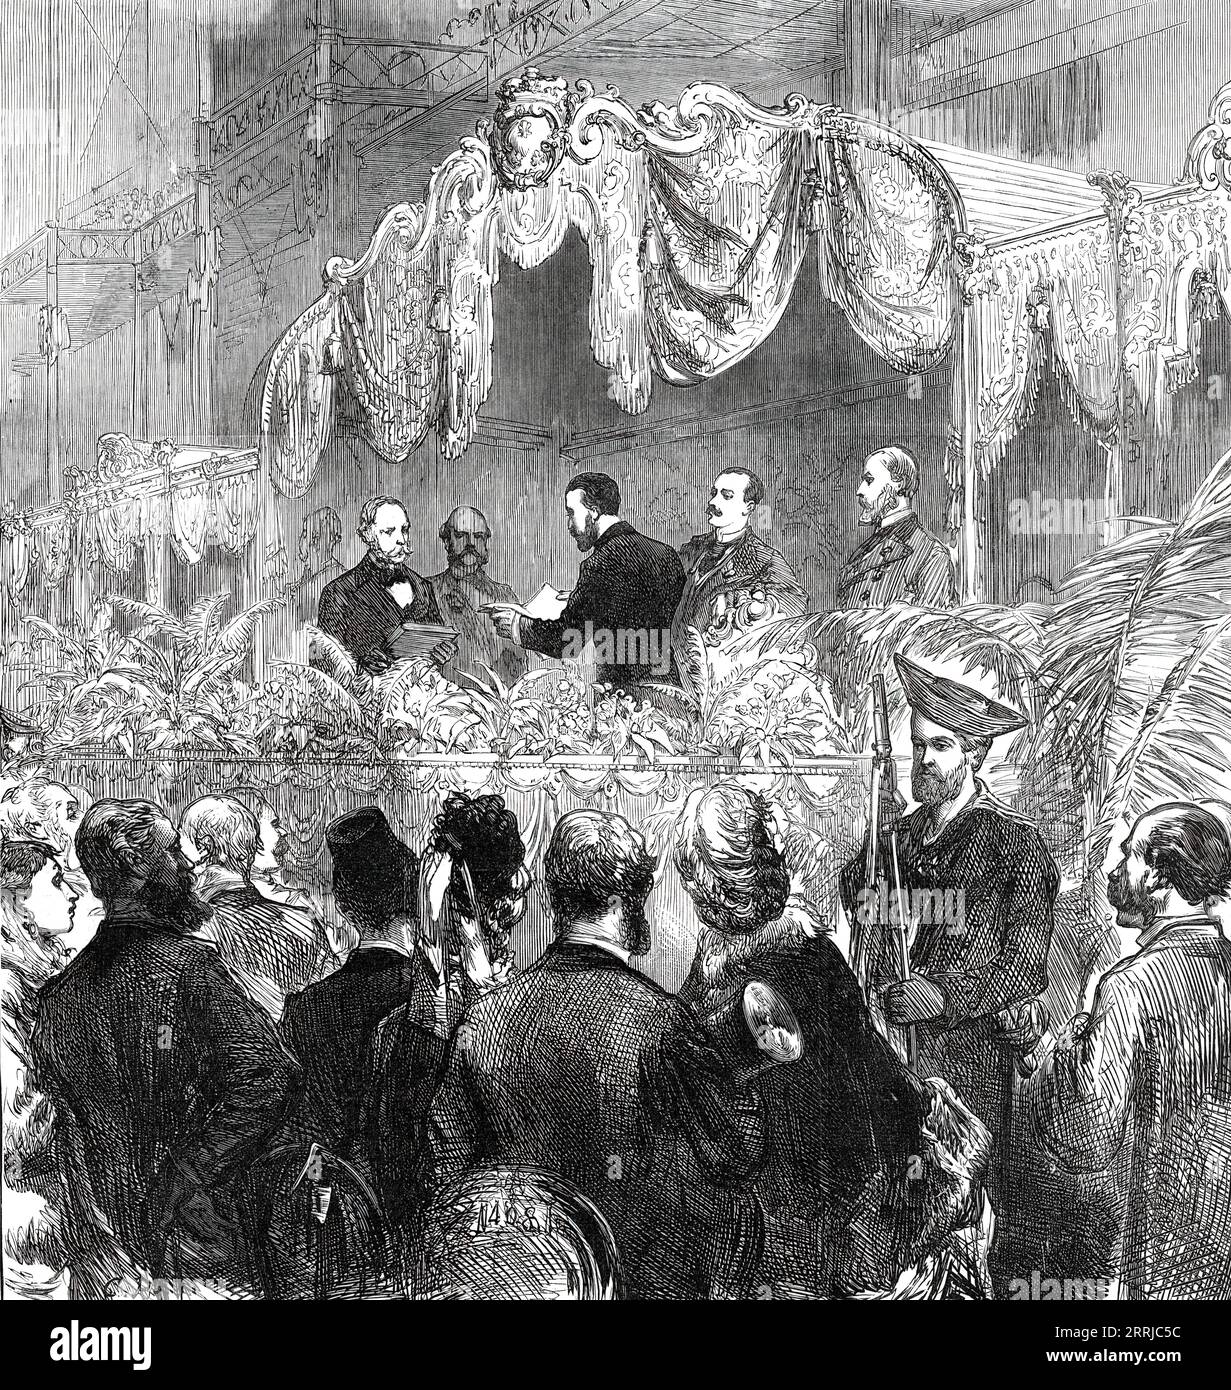 Opening of the Royal Aquarium and Summer and Winter Garden, Westminster, by the Duke of Edinburgh, 1876. 'There was an assembly of nearly ten thousand ladies and gentlemen...The Royal box was decorated with festooned curtains of crimson damask, blue silk hangings with white lace, and lilies provided by Mr. Wills, florist...this undertaking is intended, besides the aquarium...to afford facilities for &quot;the encouragement of artistic, scientific, and musical tastes&quot;. It is to be &quot;not only a popular exhibition, but a means of intellectual enjoyment and educational advantage&quot;. Hi Stock Photo